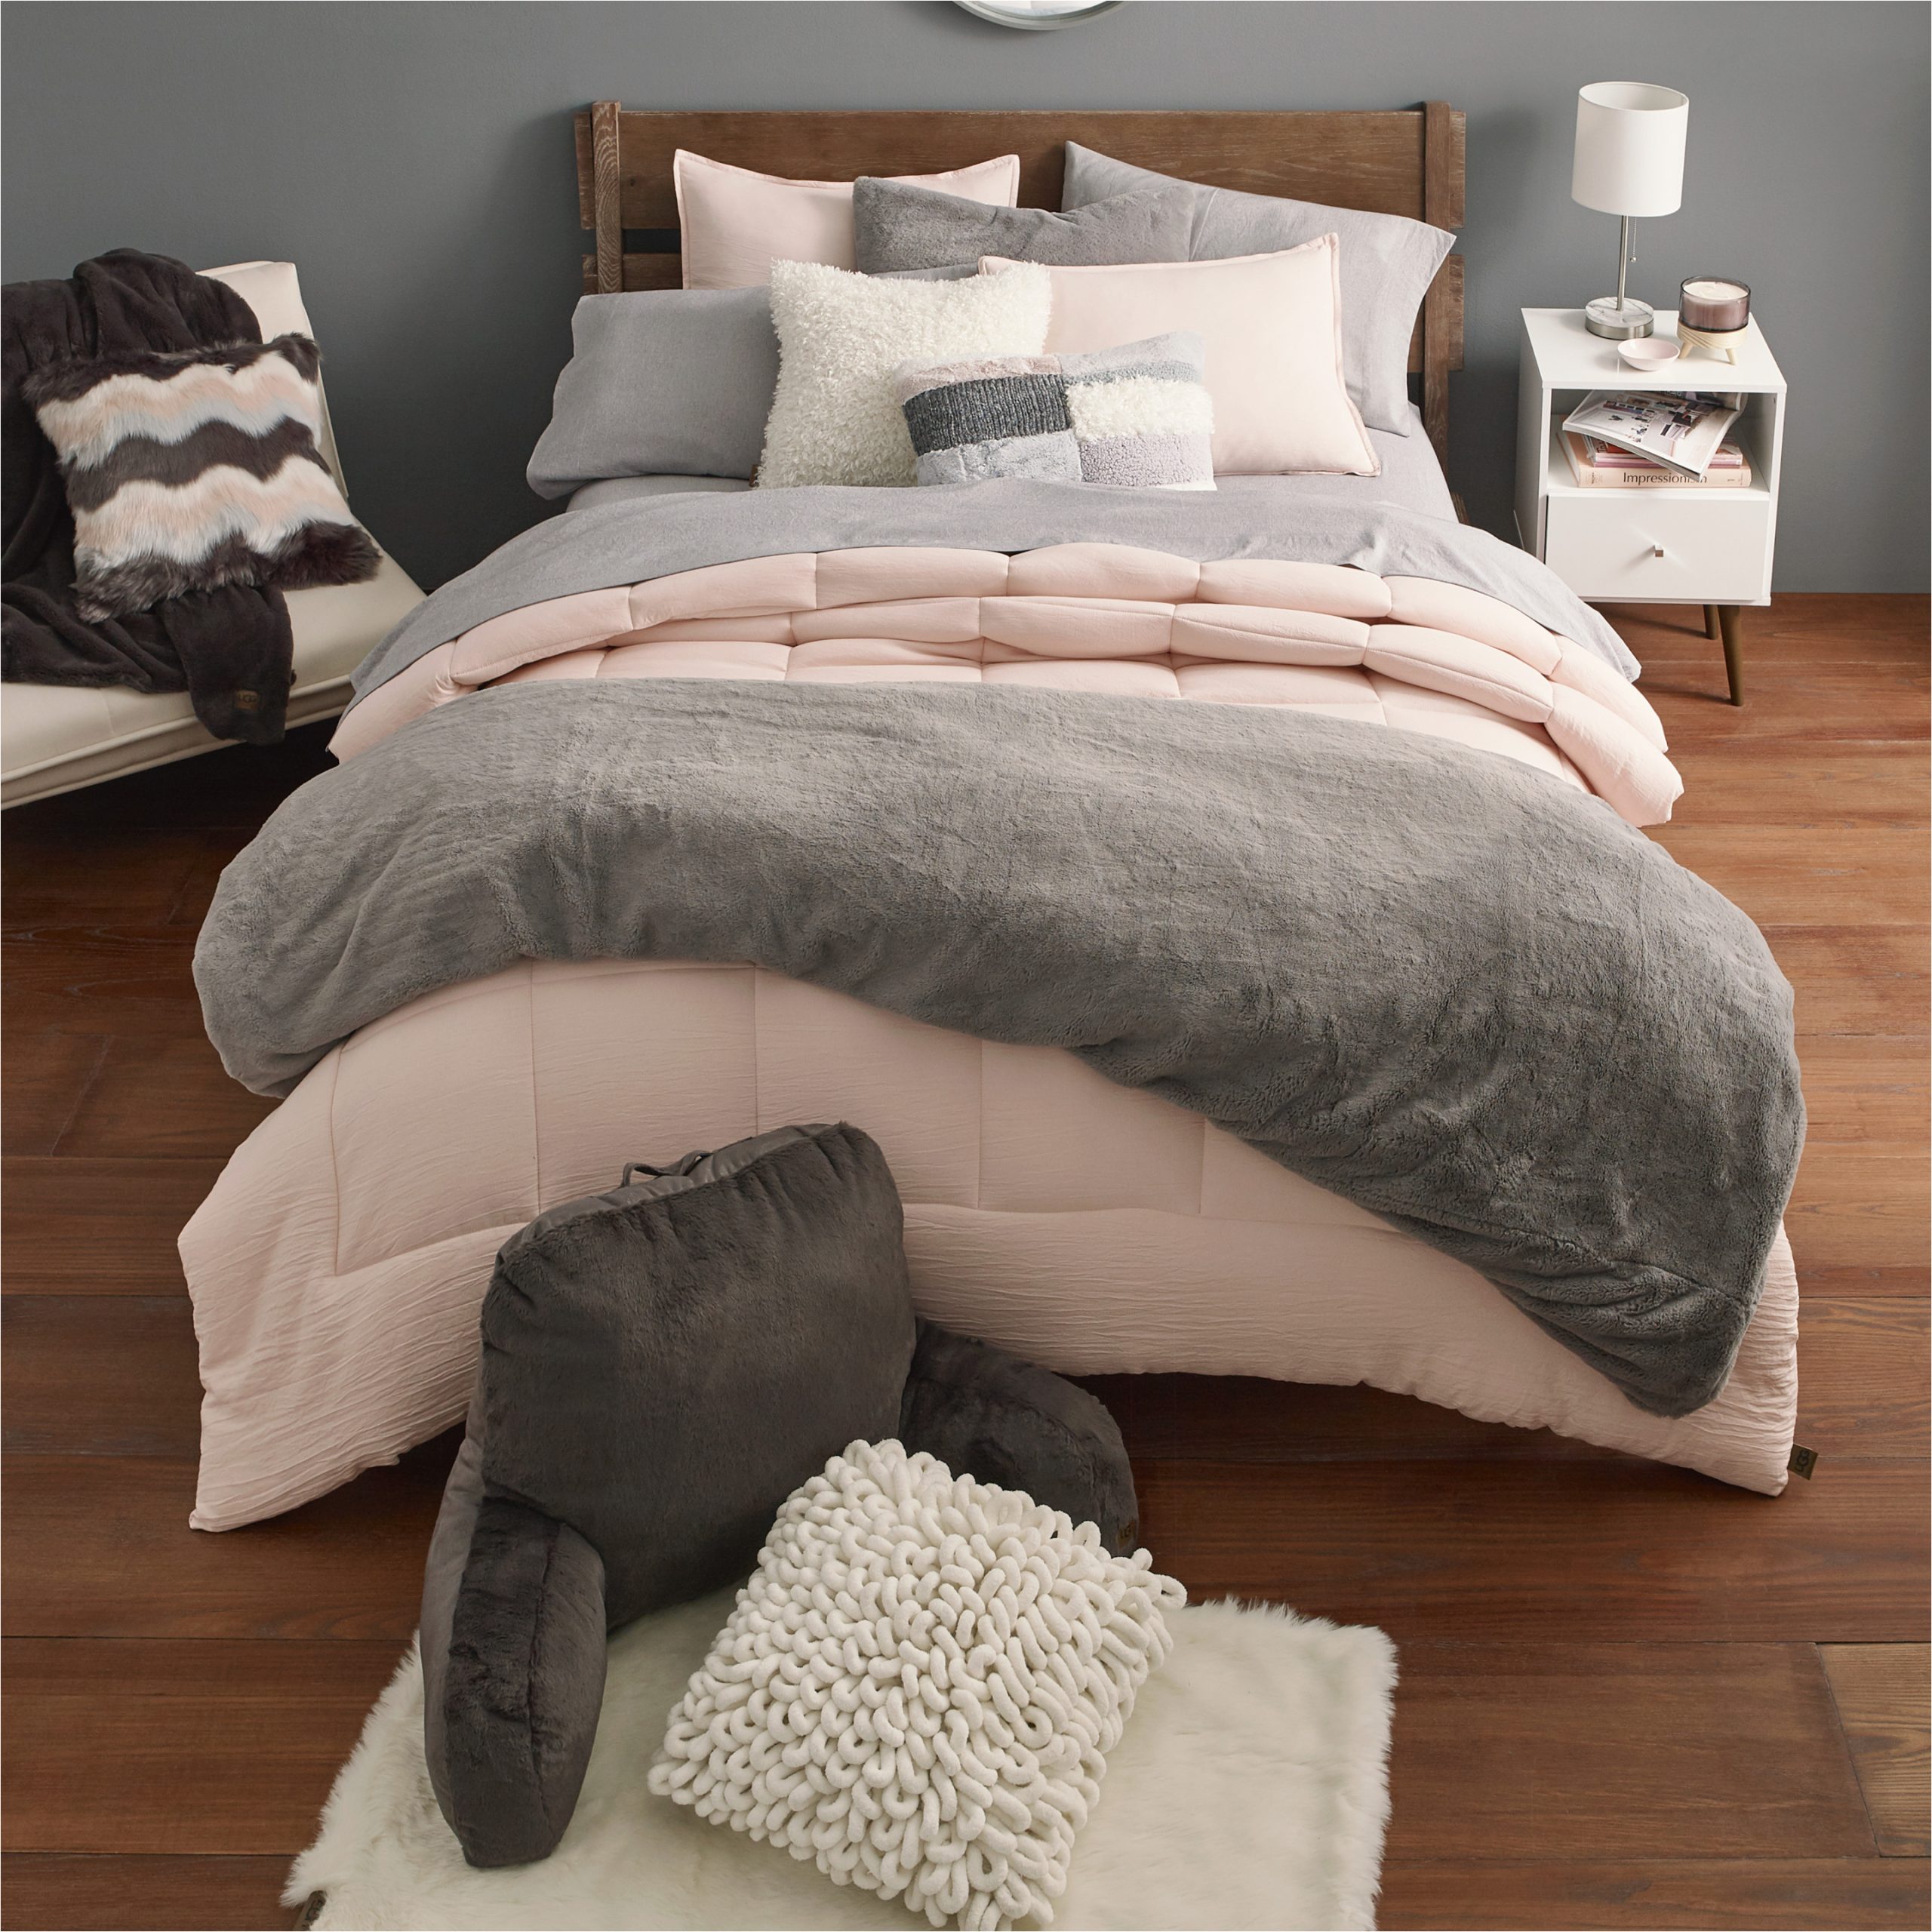 Maples Rugs Bed Bath and Beyond Throw Rugs Bed Bath & Beyond